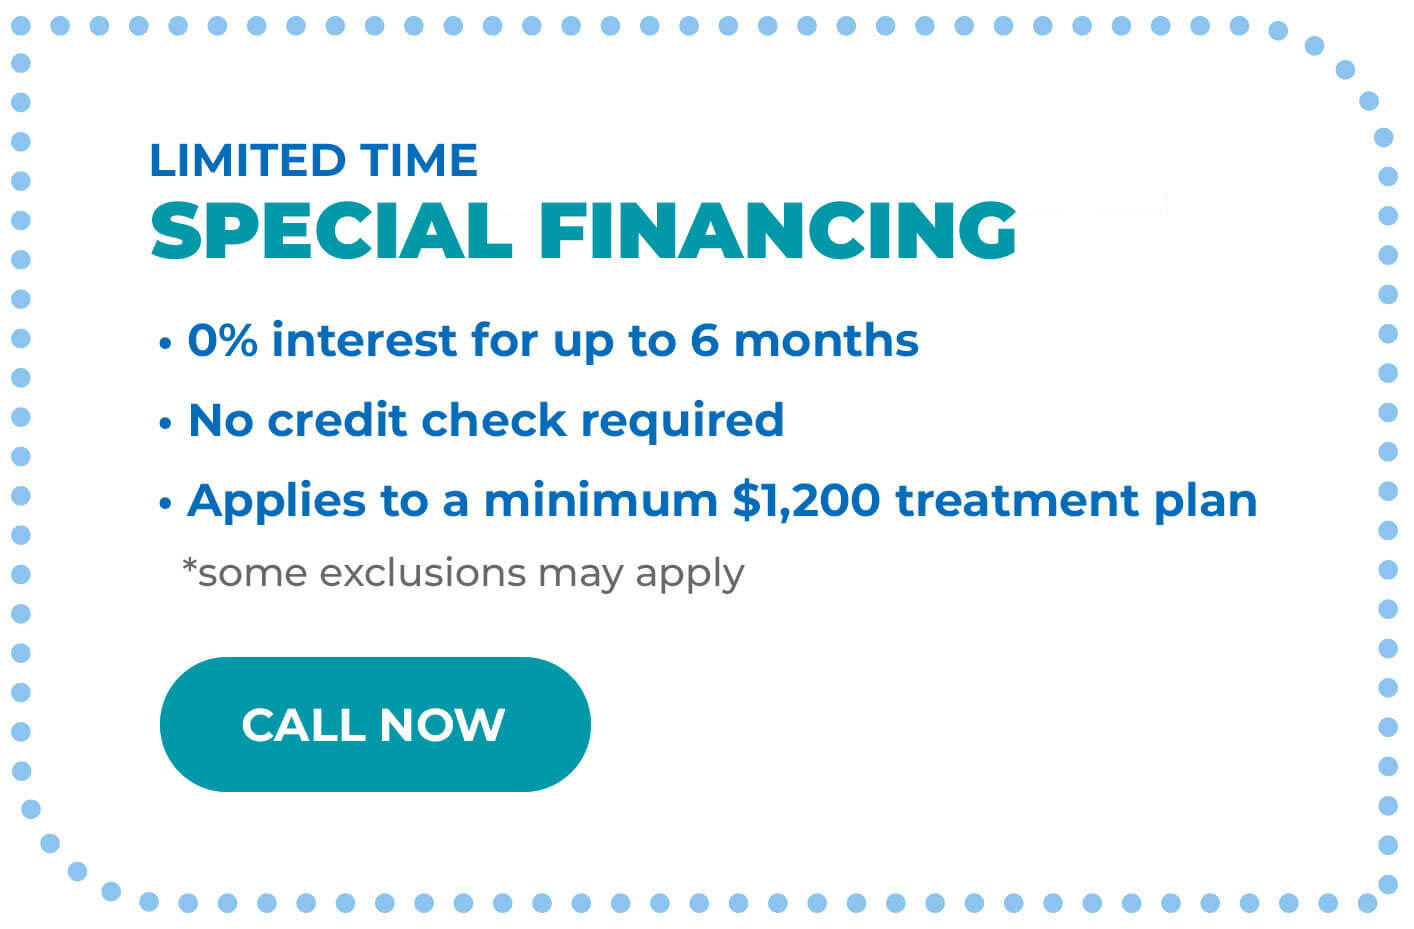 Limited Time Special Financing: 0% interest for up to 6 months; no credit check required; applies to a minimum $1,200 treatment plan. Some exclusions may apply.